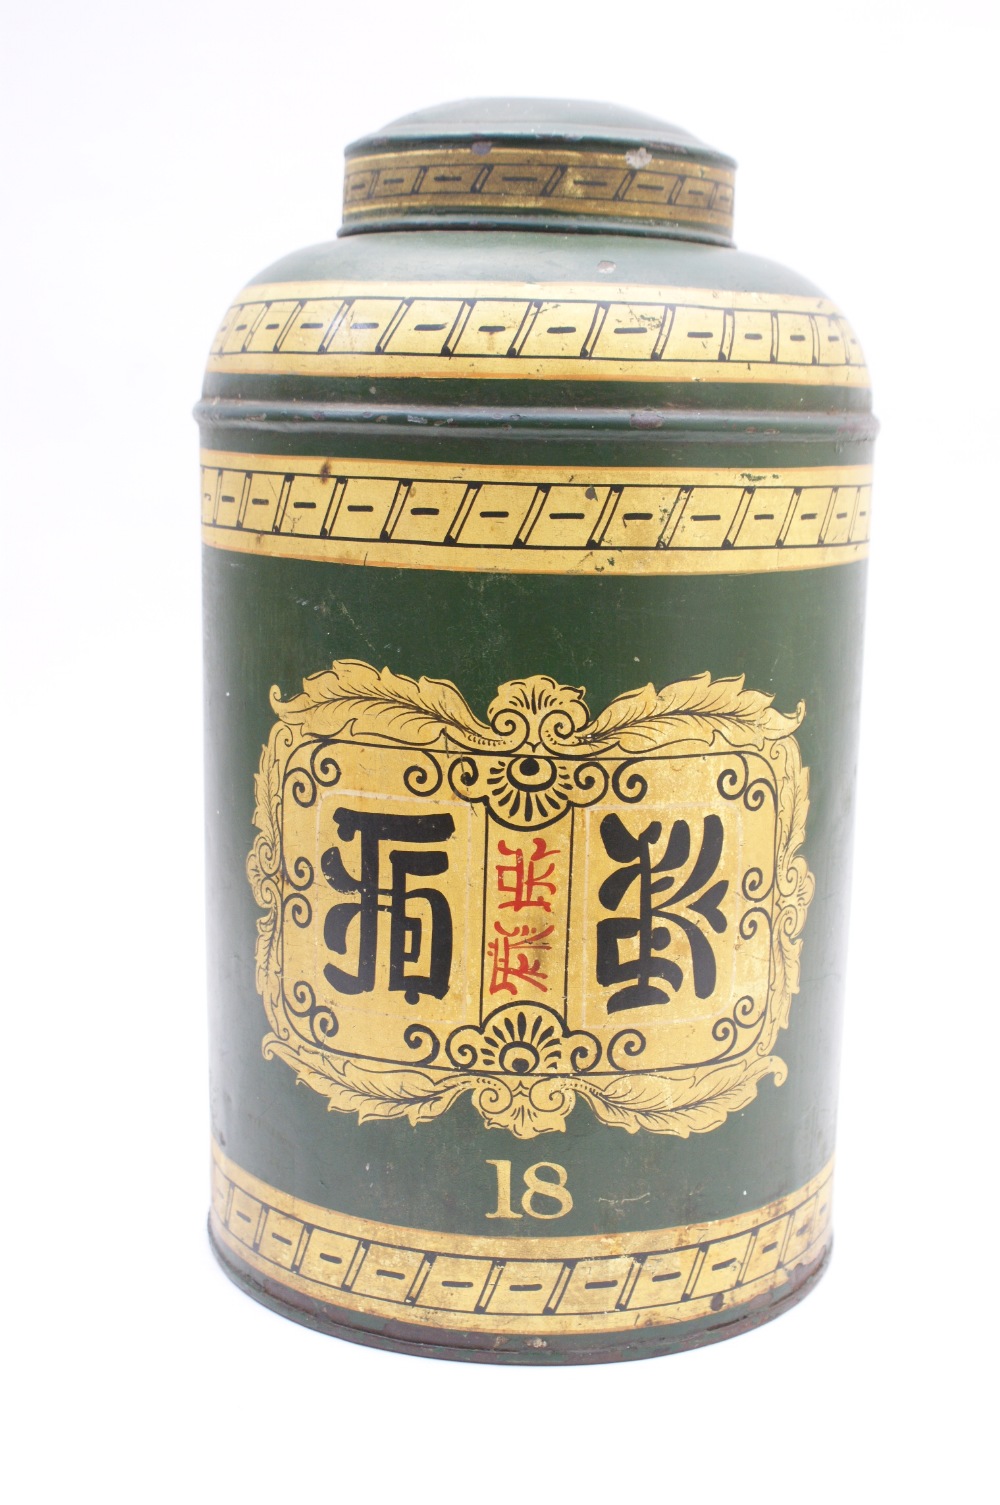 Toleware tea canister for Chinese green